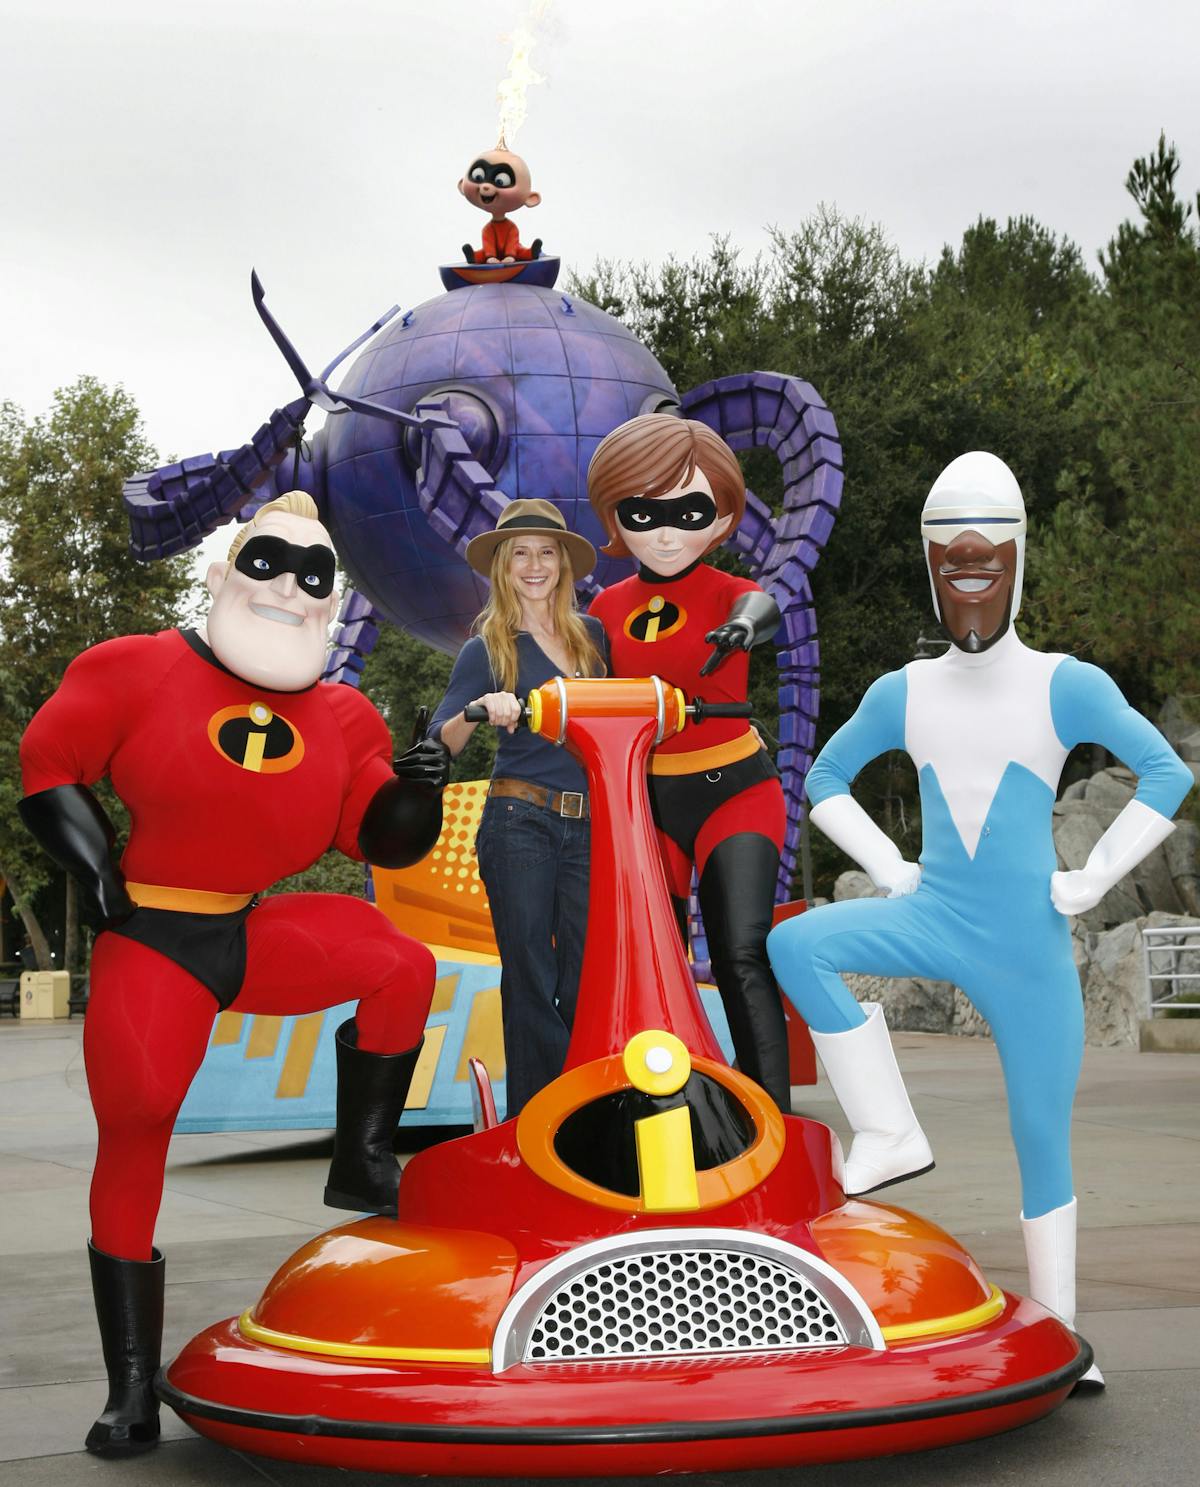 Hpac Com Sites Hpac com Files Uploads 2015 02 The Incredibles Rgb For Web